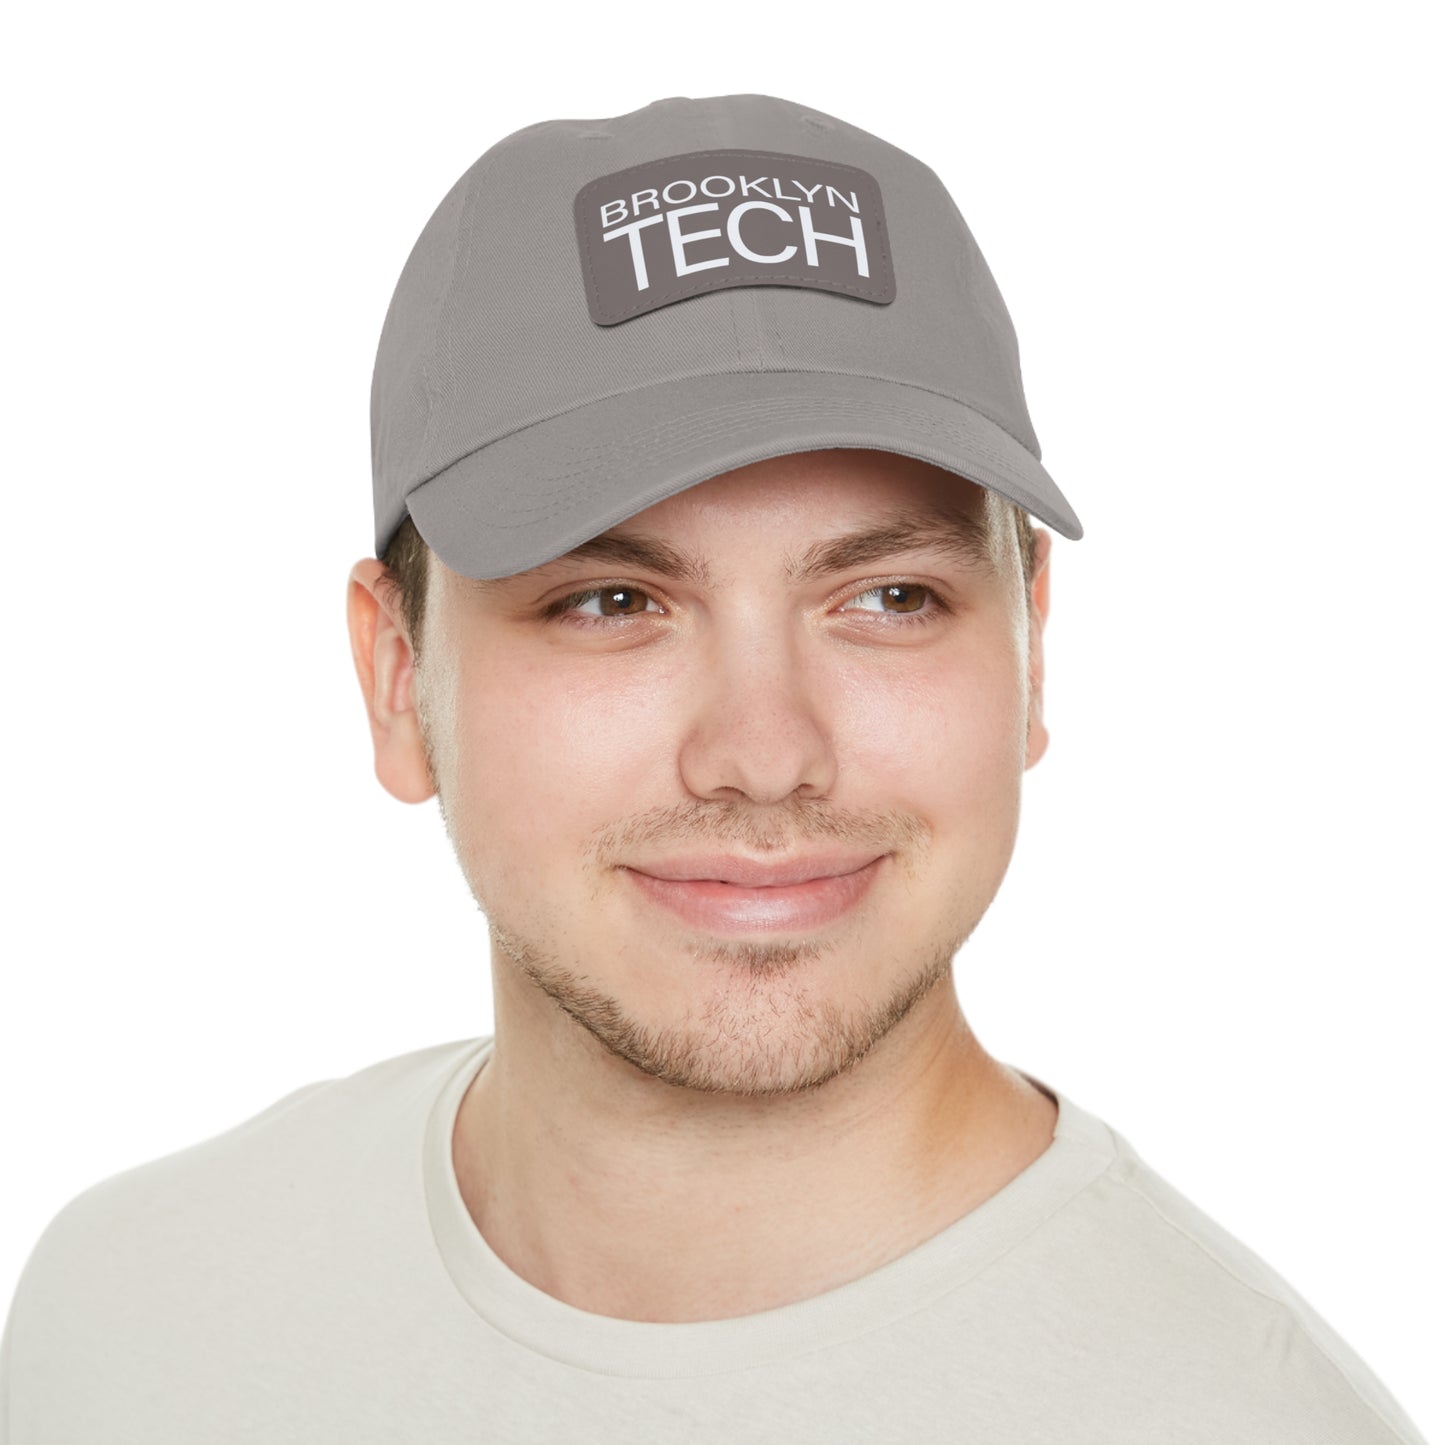 Modern Brooklyn Tech - Hat With Rectangular Leather Patch